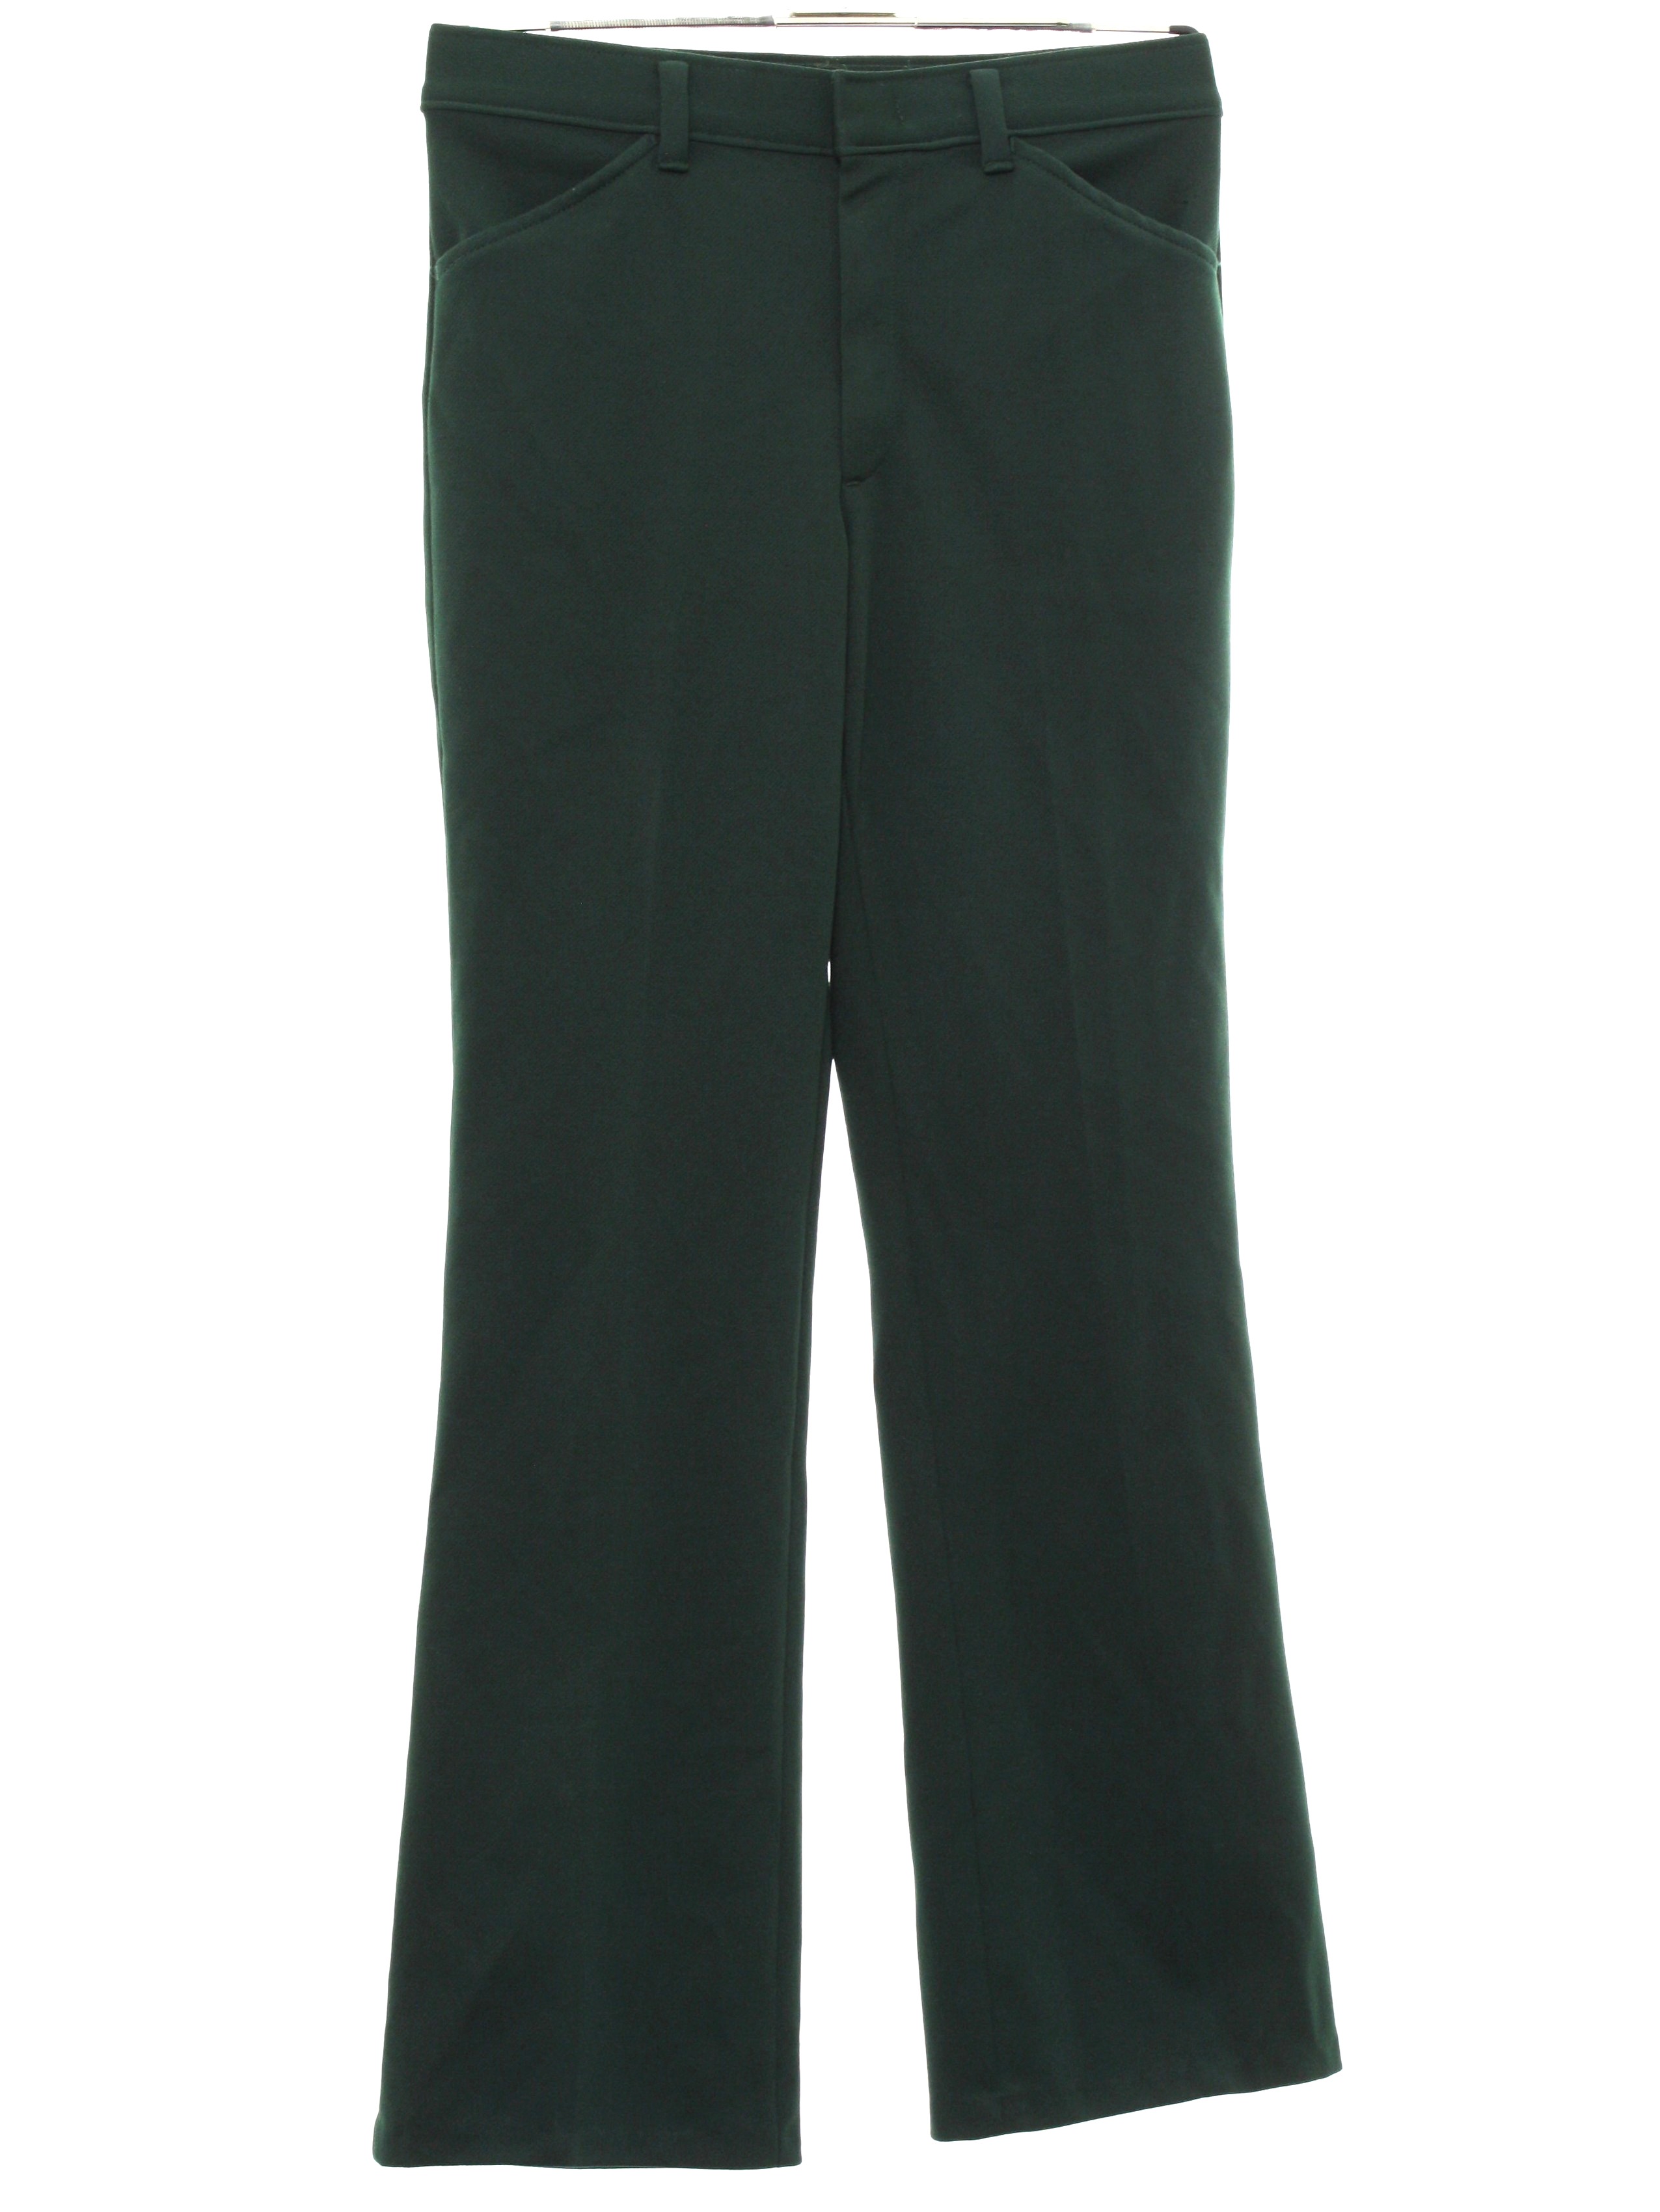 Retro 1970s Flared Pants / Flares: 70s -Farah Time Out- Mens dark green ...